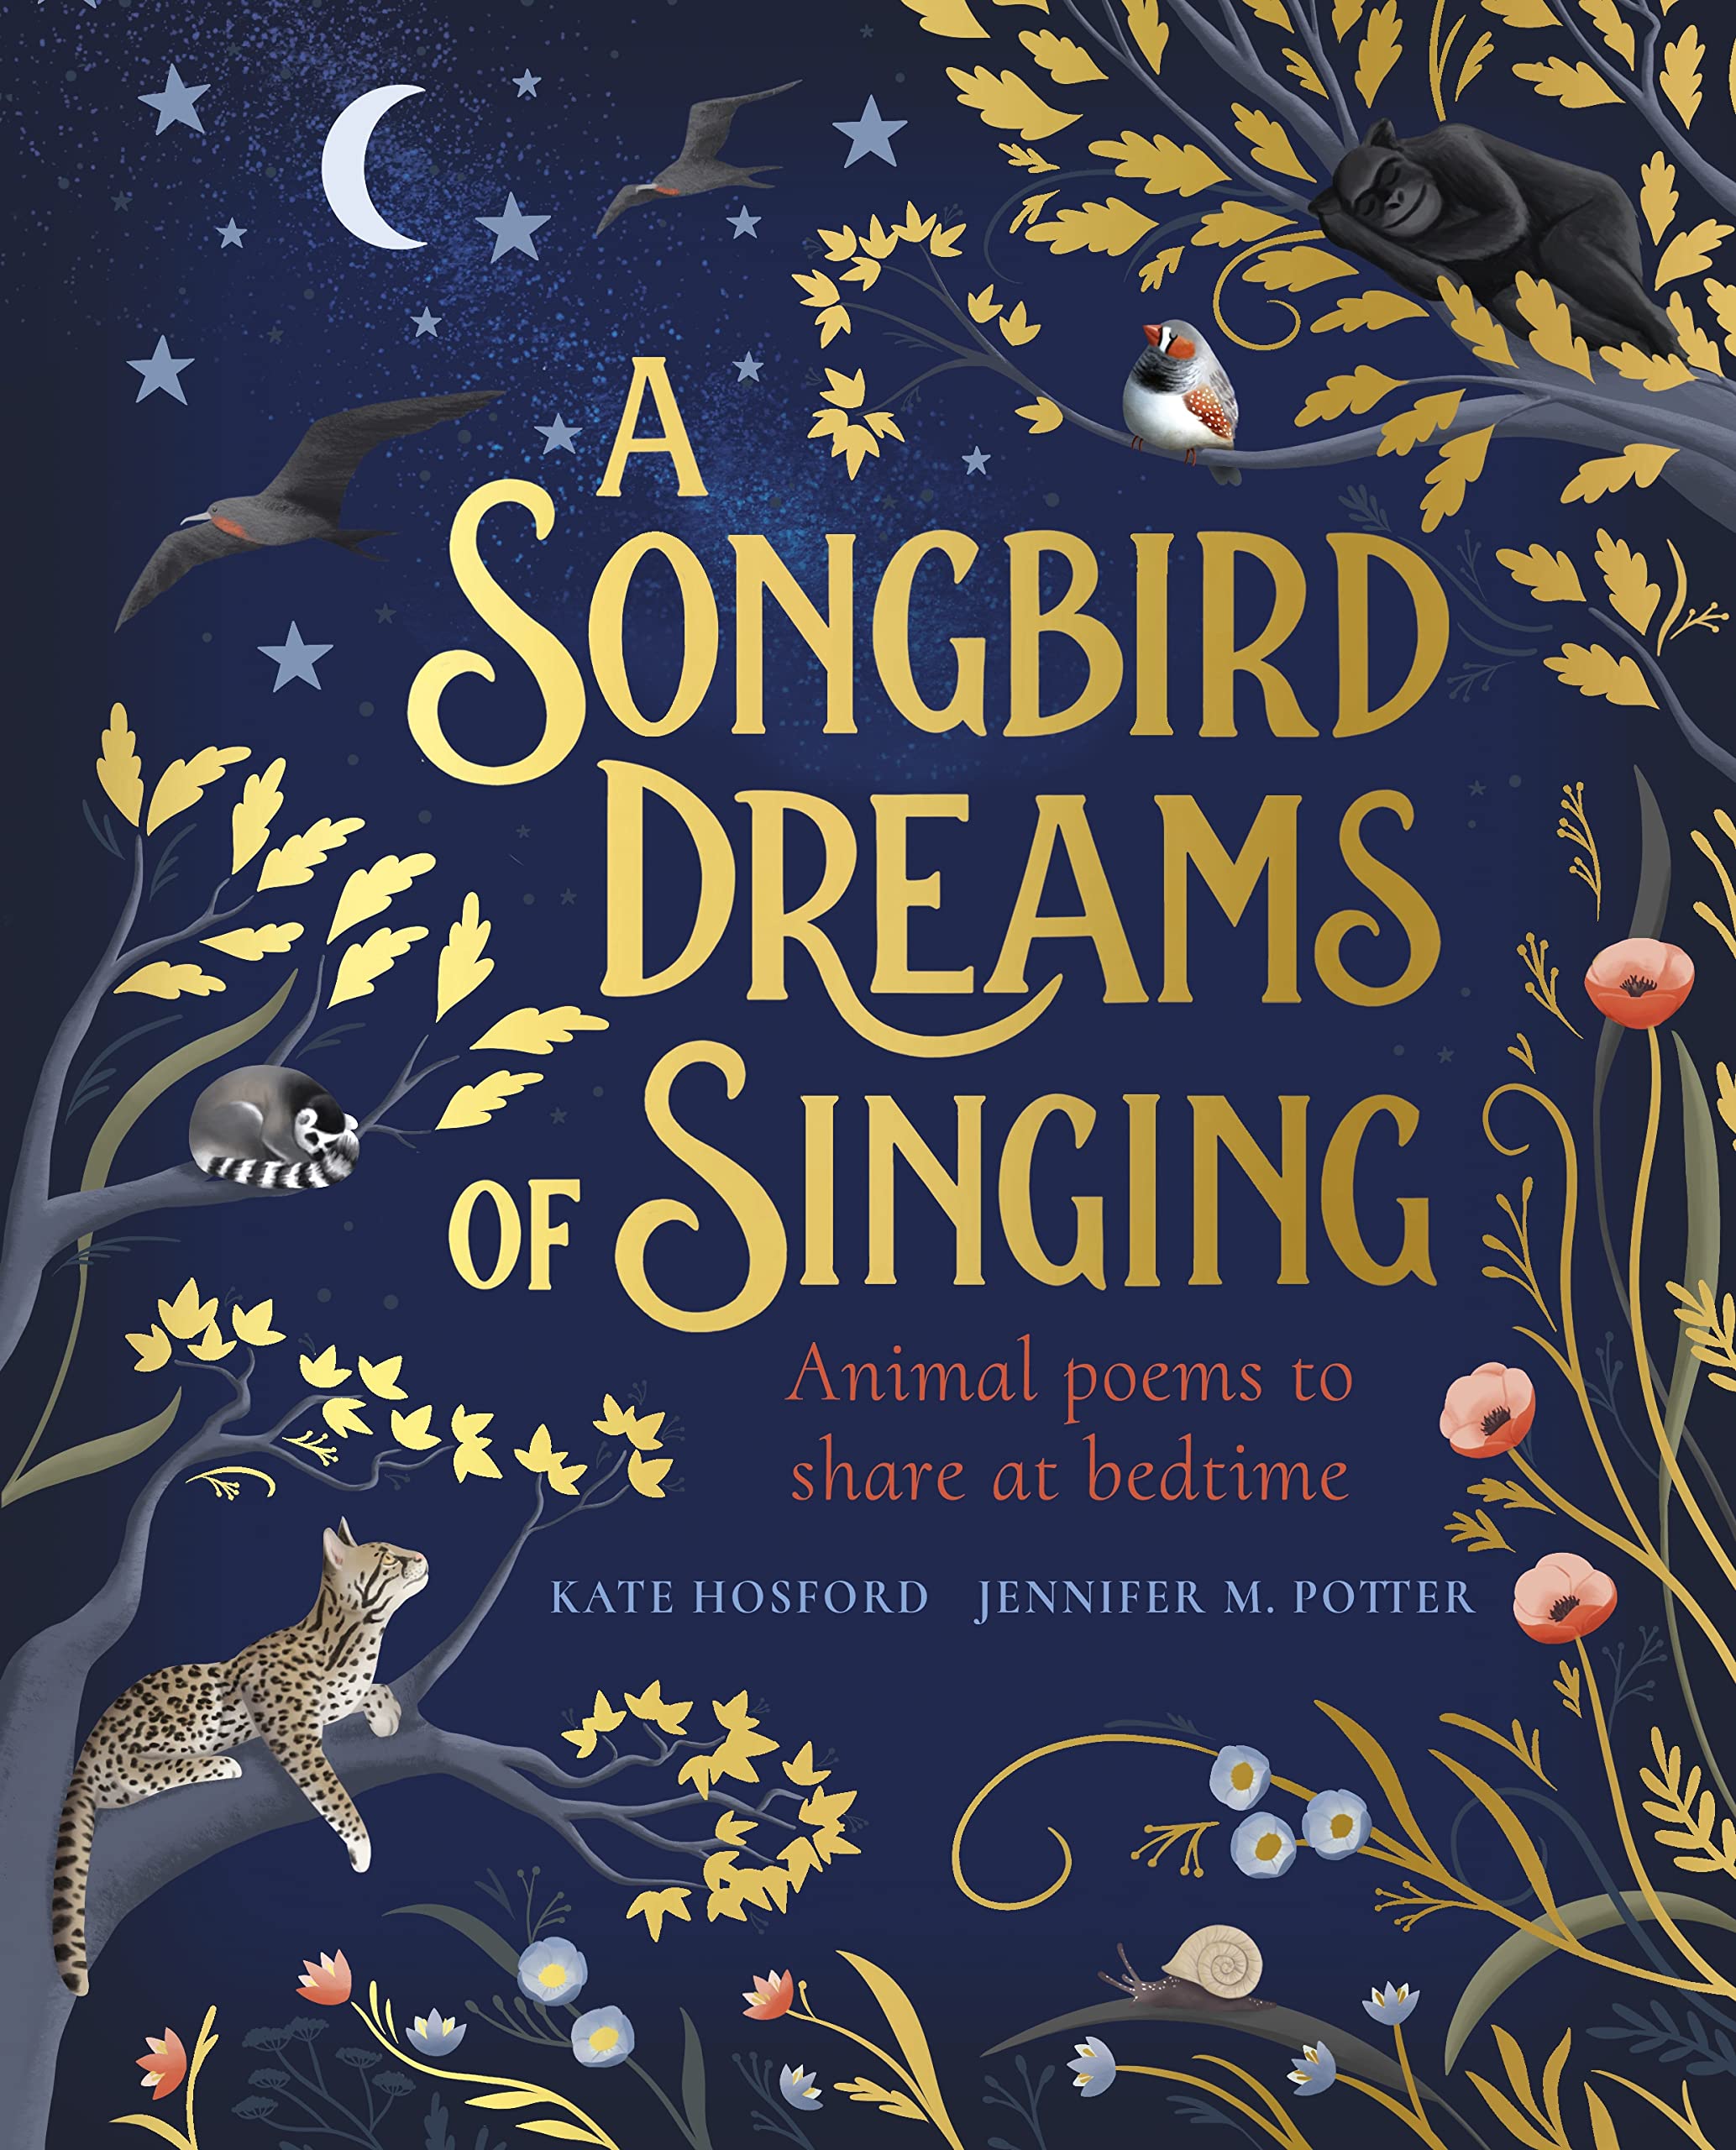 A Songbird Dreams of Singing | Kate Hosford